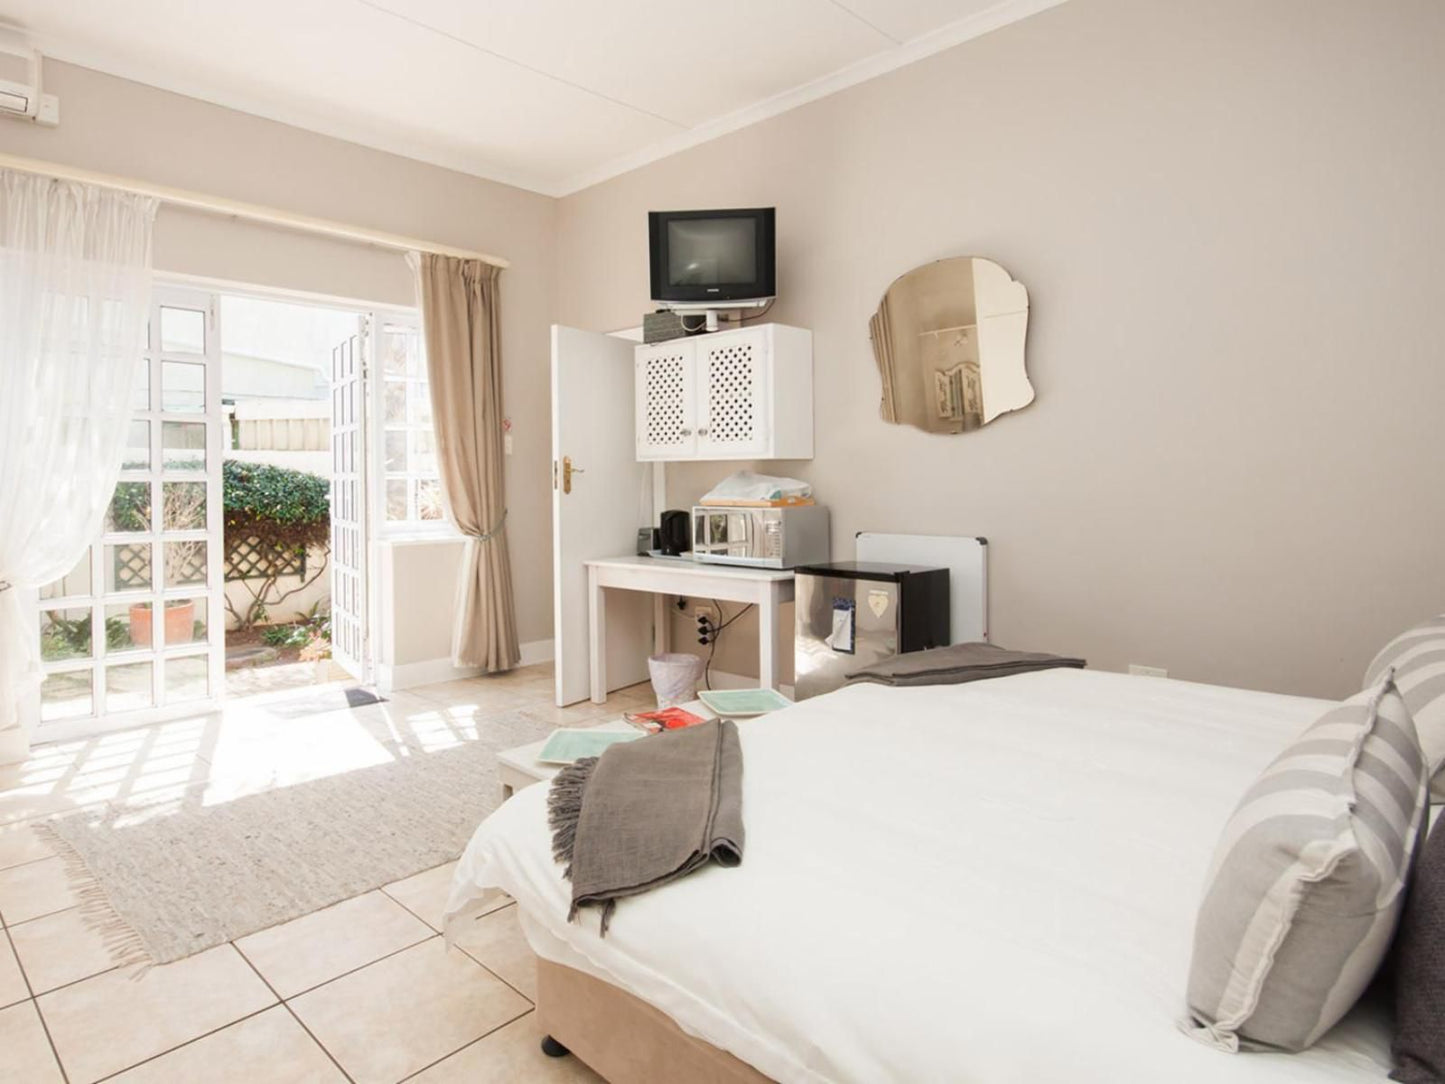 Anchorage Guest House Summerstrand Port Elizabeth Eastern Cape South Africa Sepia Tones, Bedroom